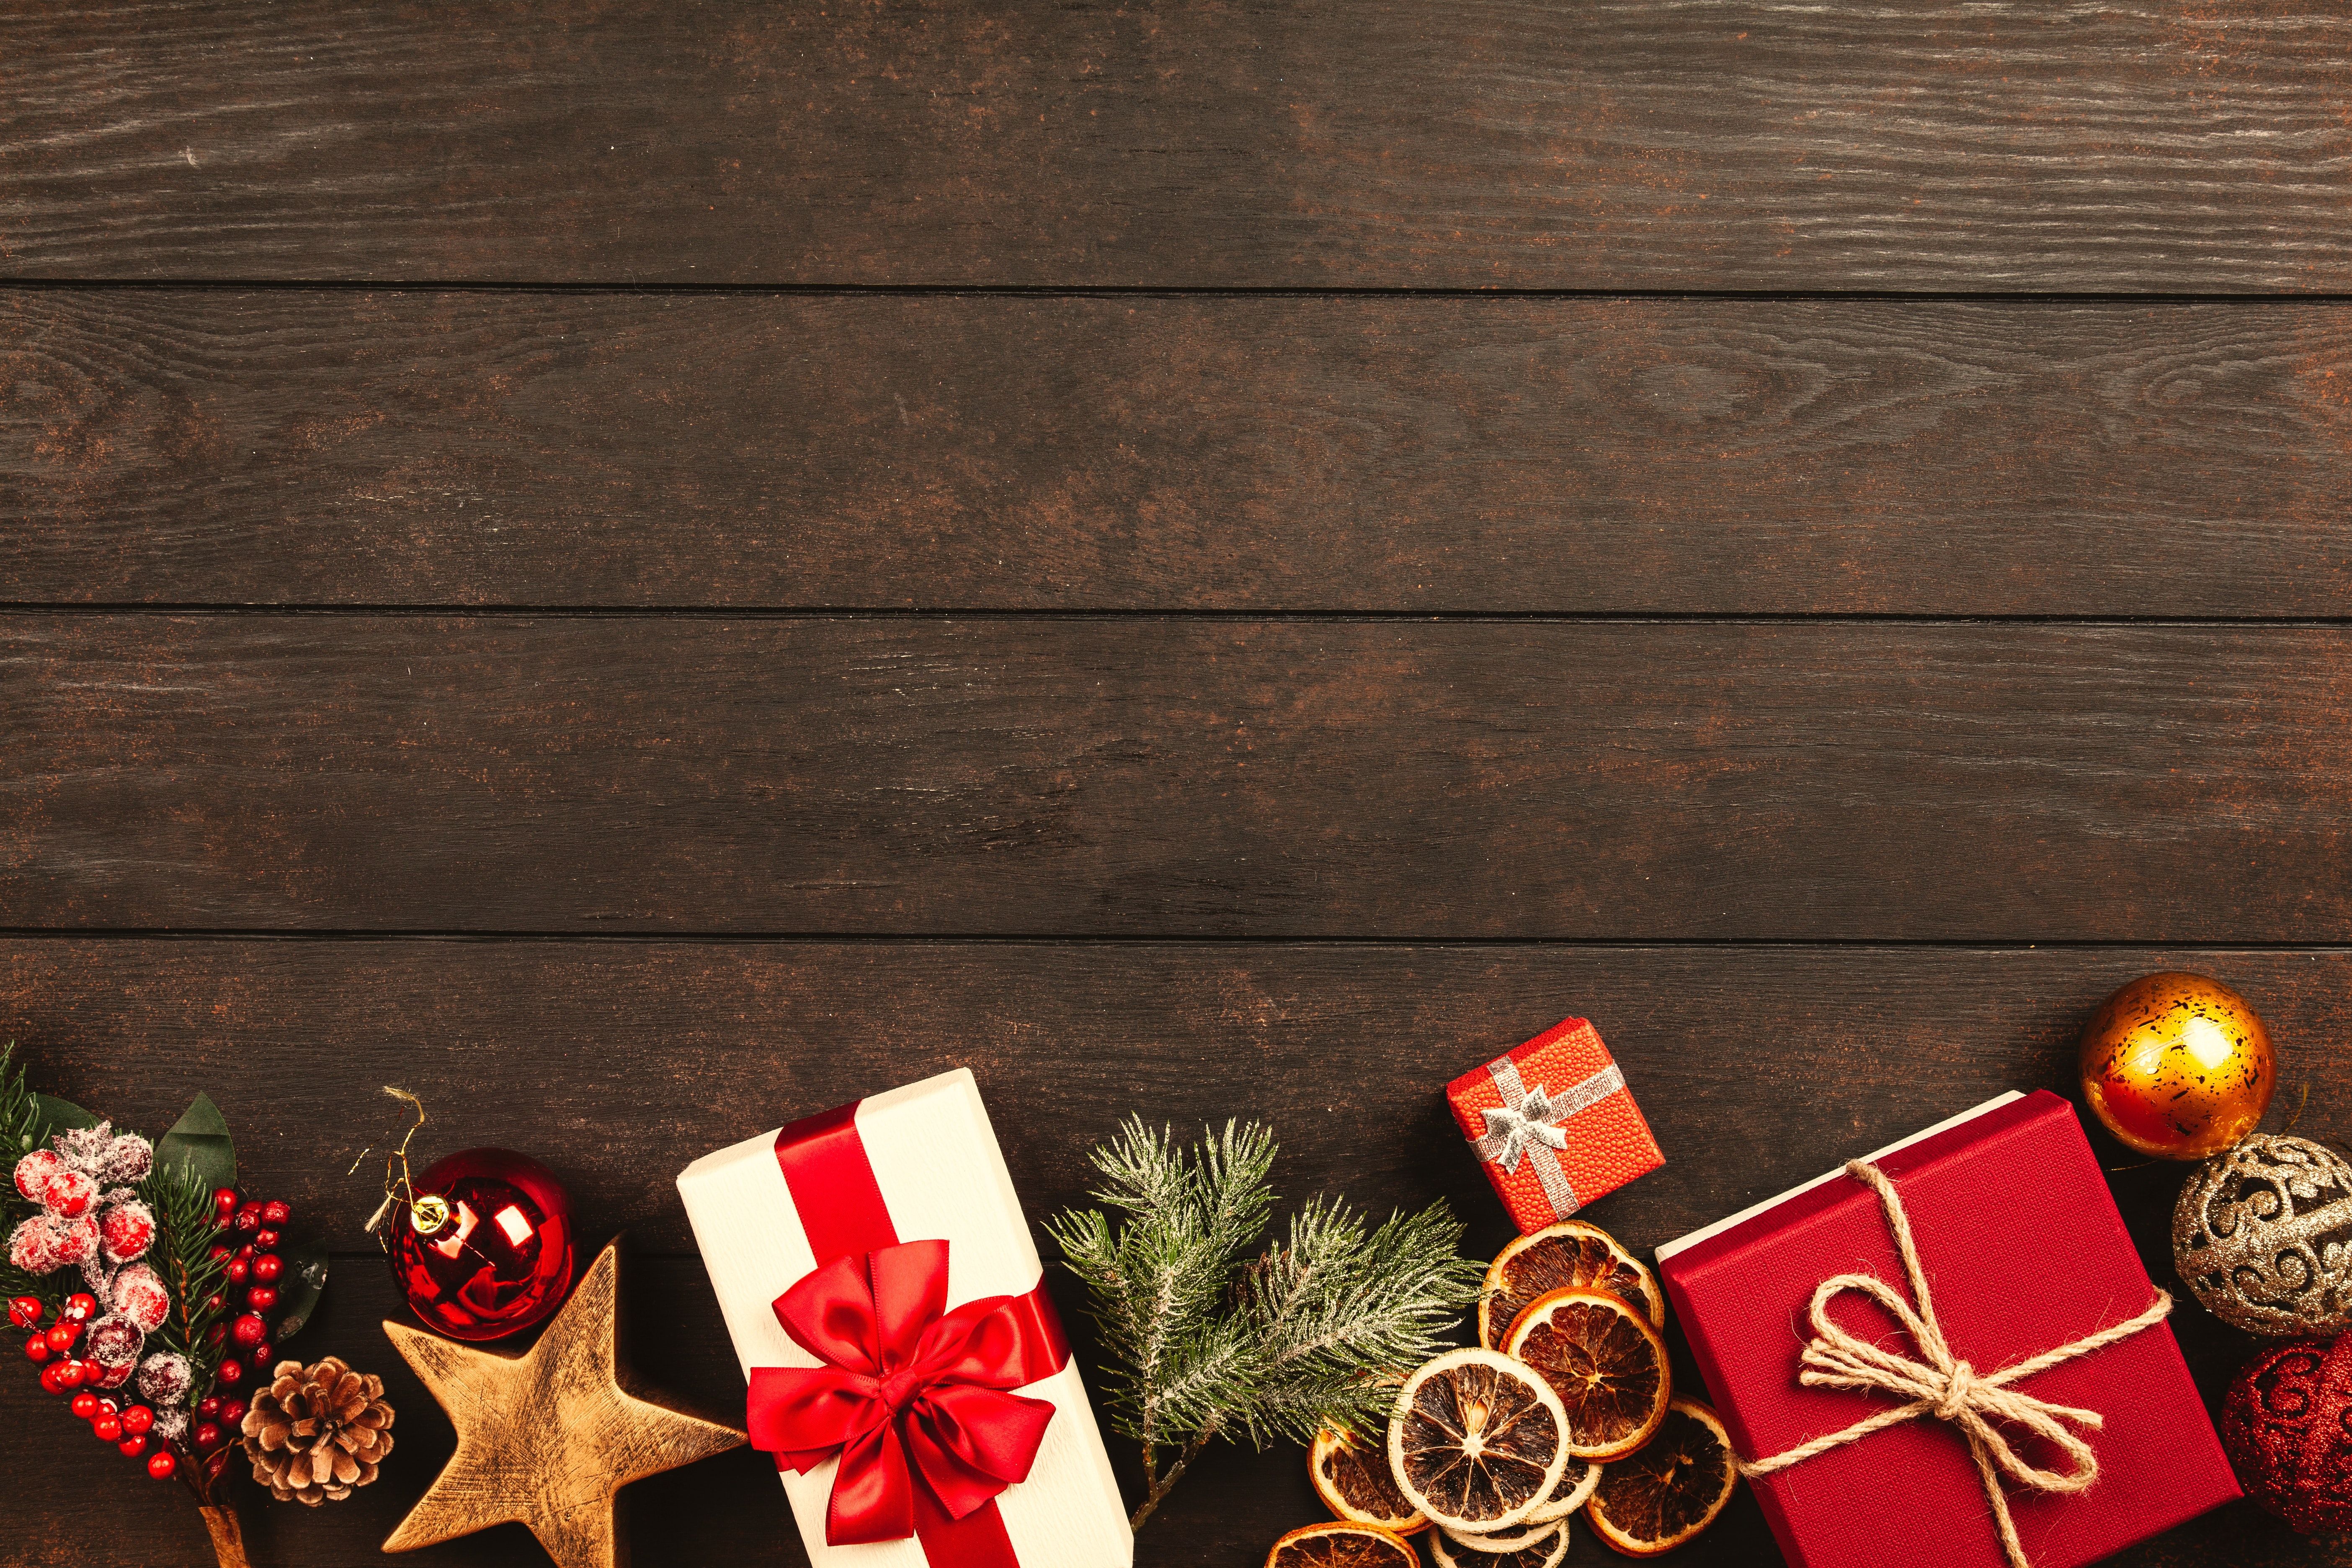 Christmas Gifts On Brown Parquet Floor · Free